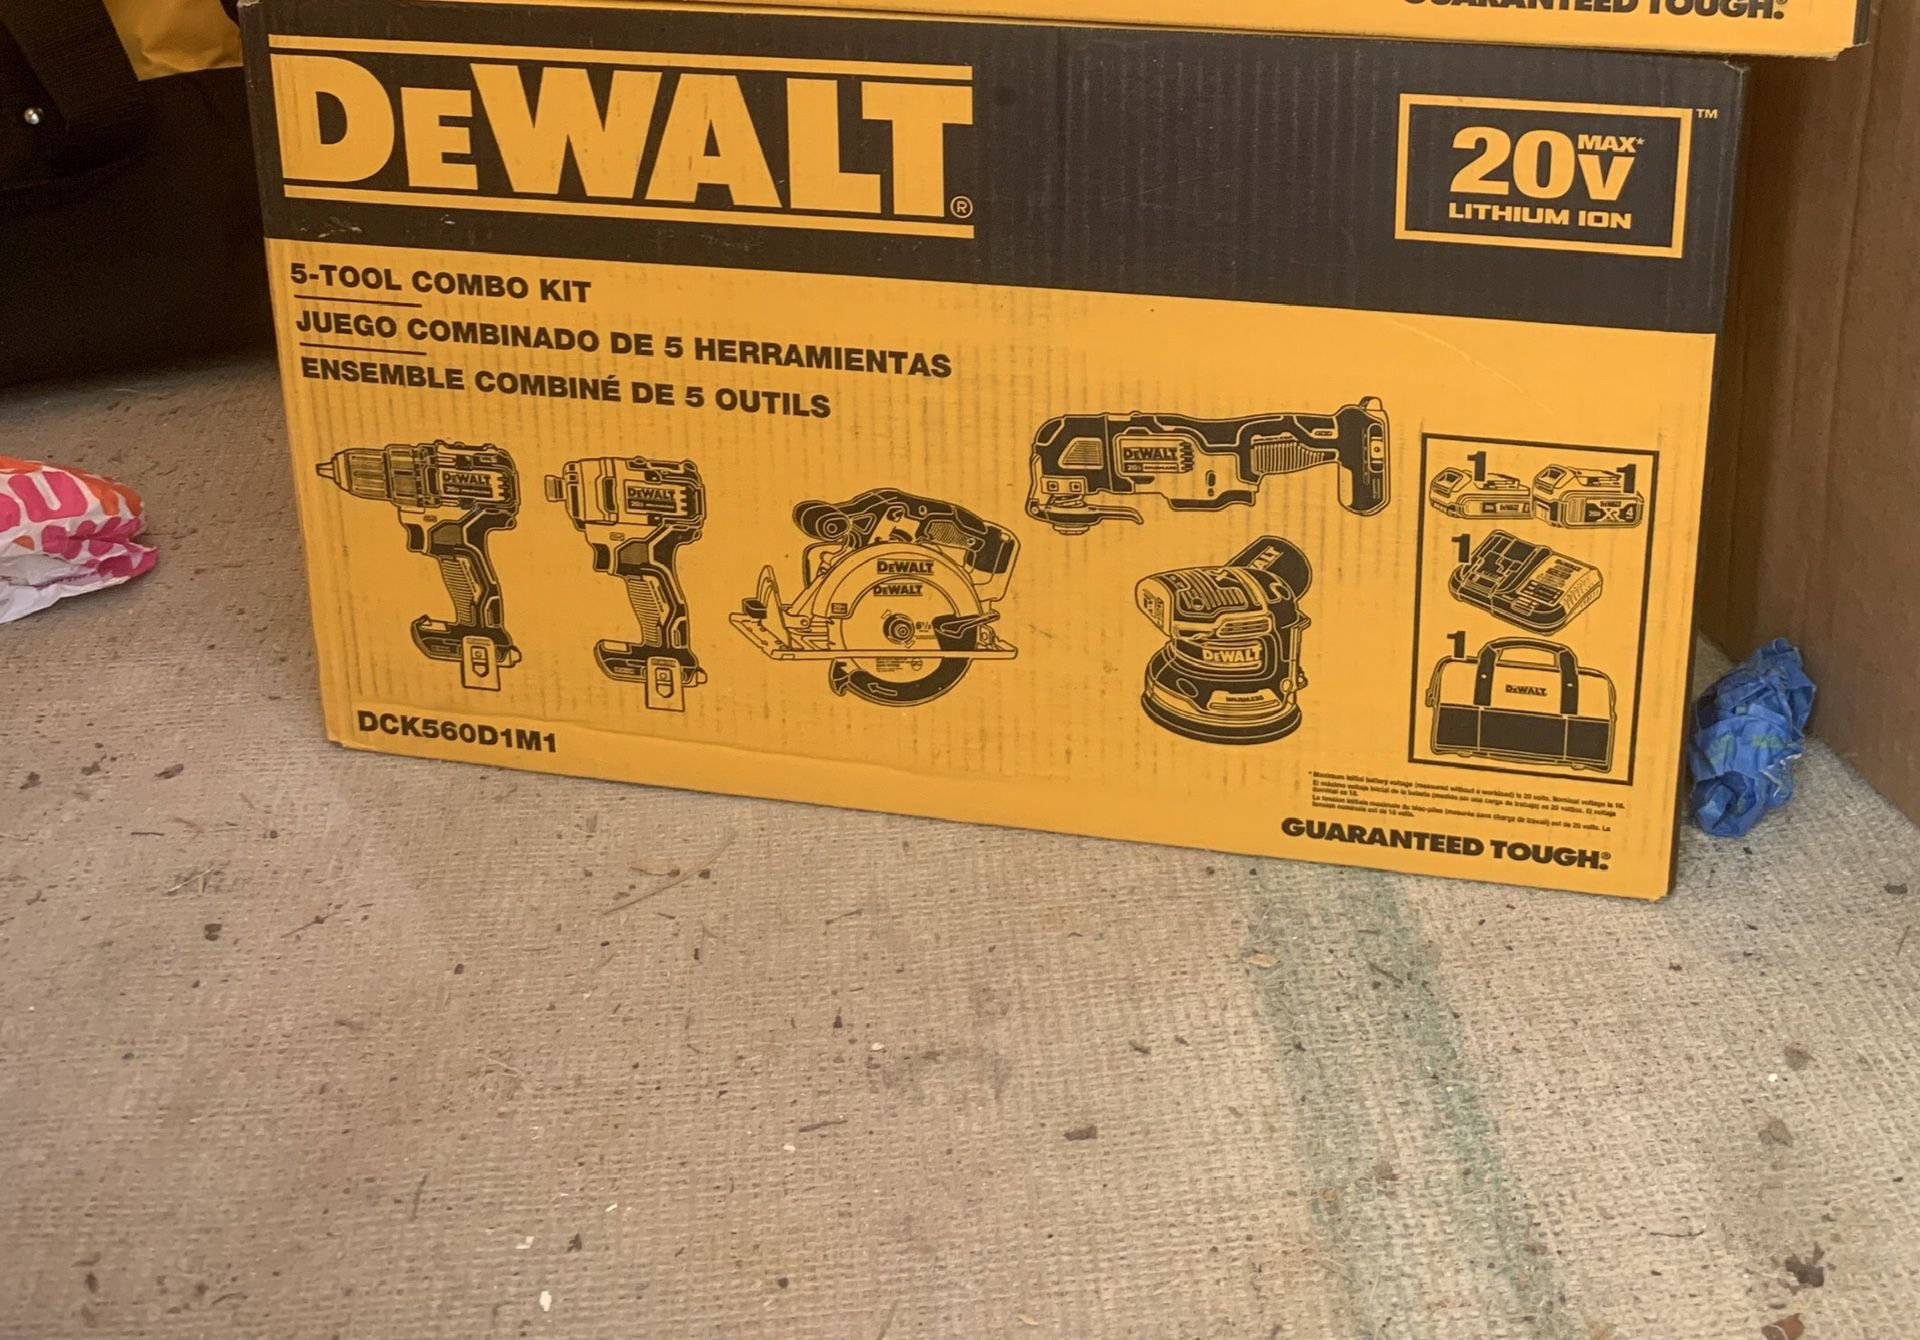 Brand new dewalt with the battery